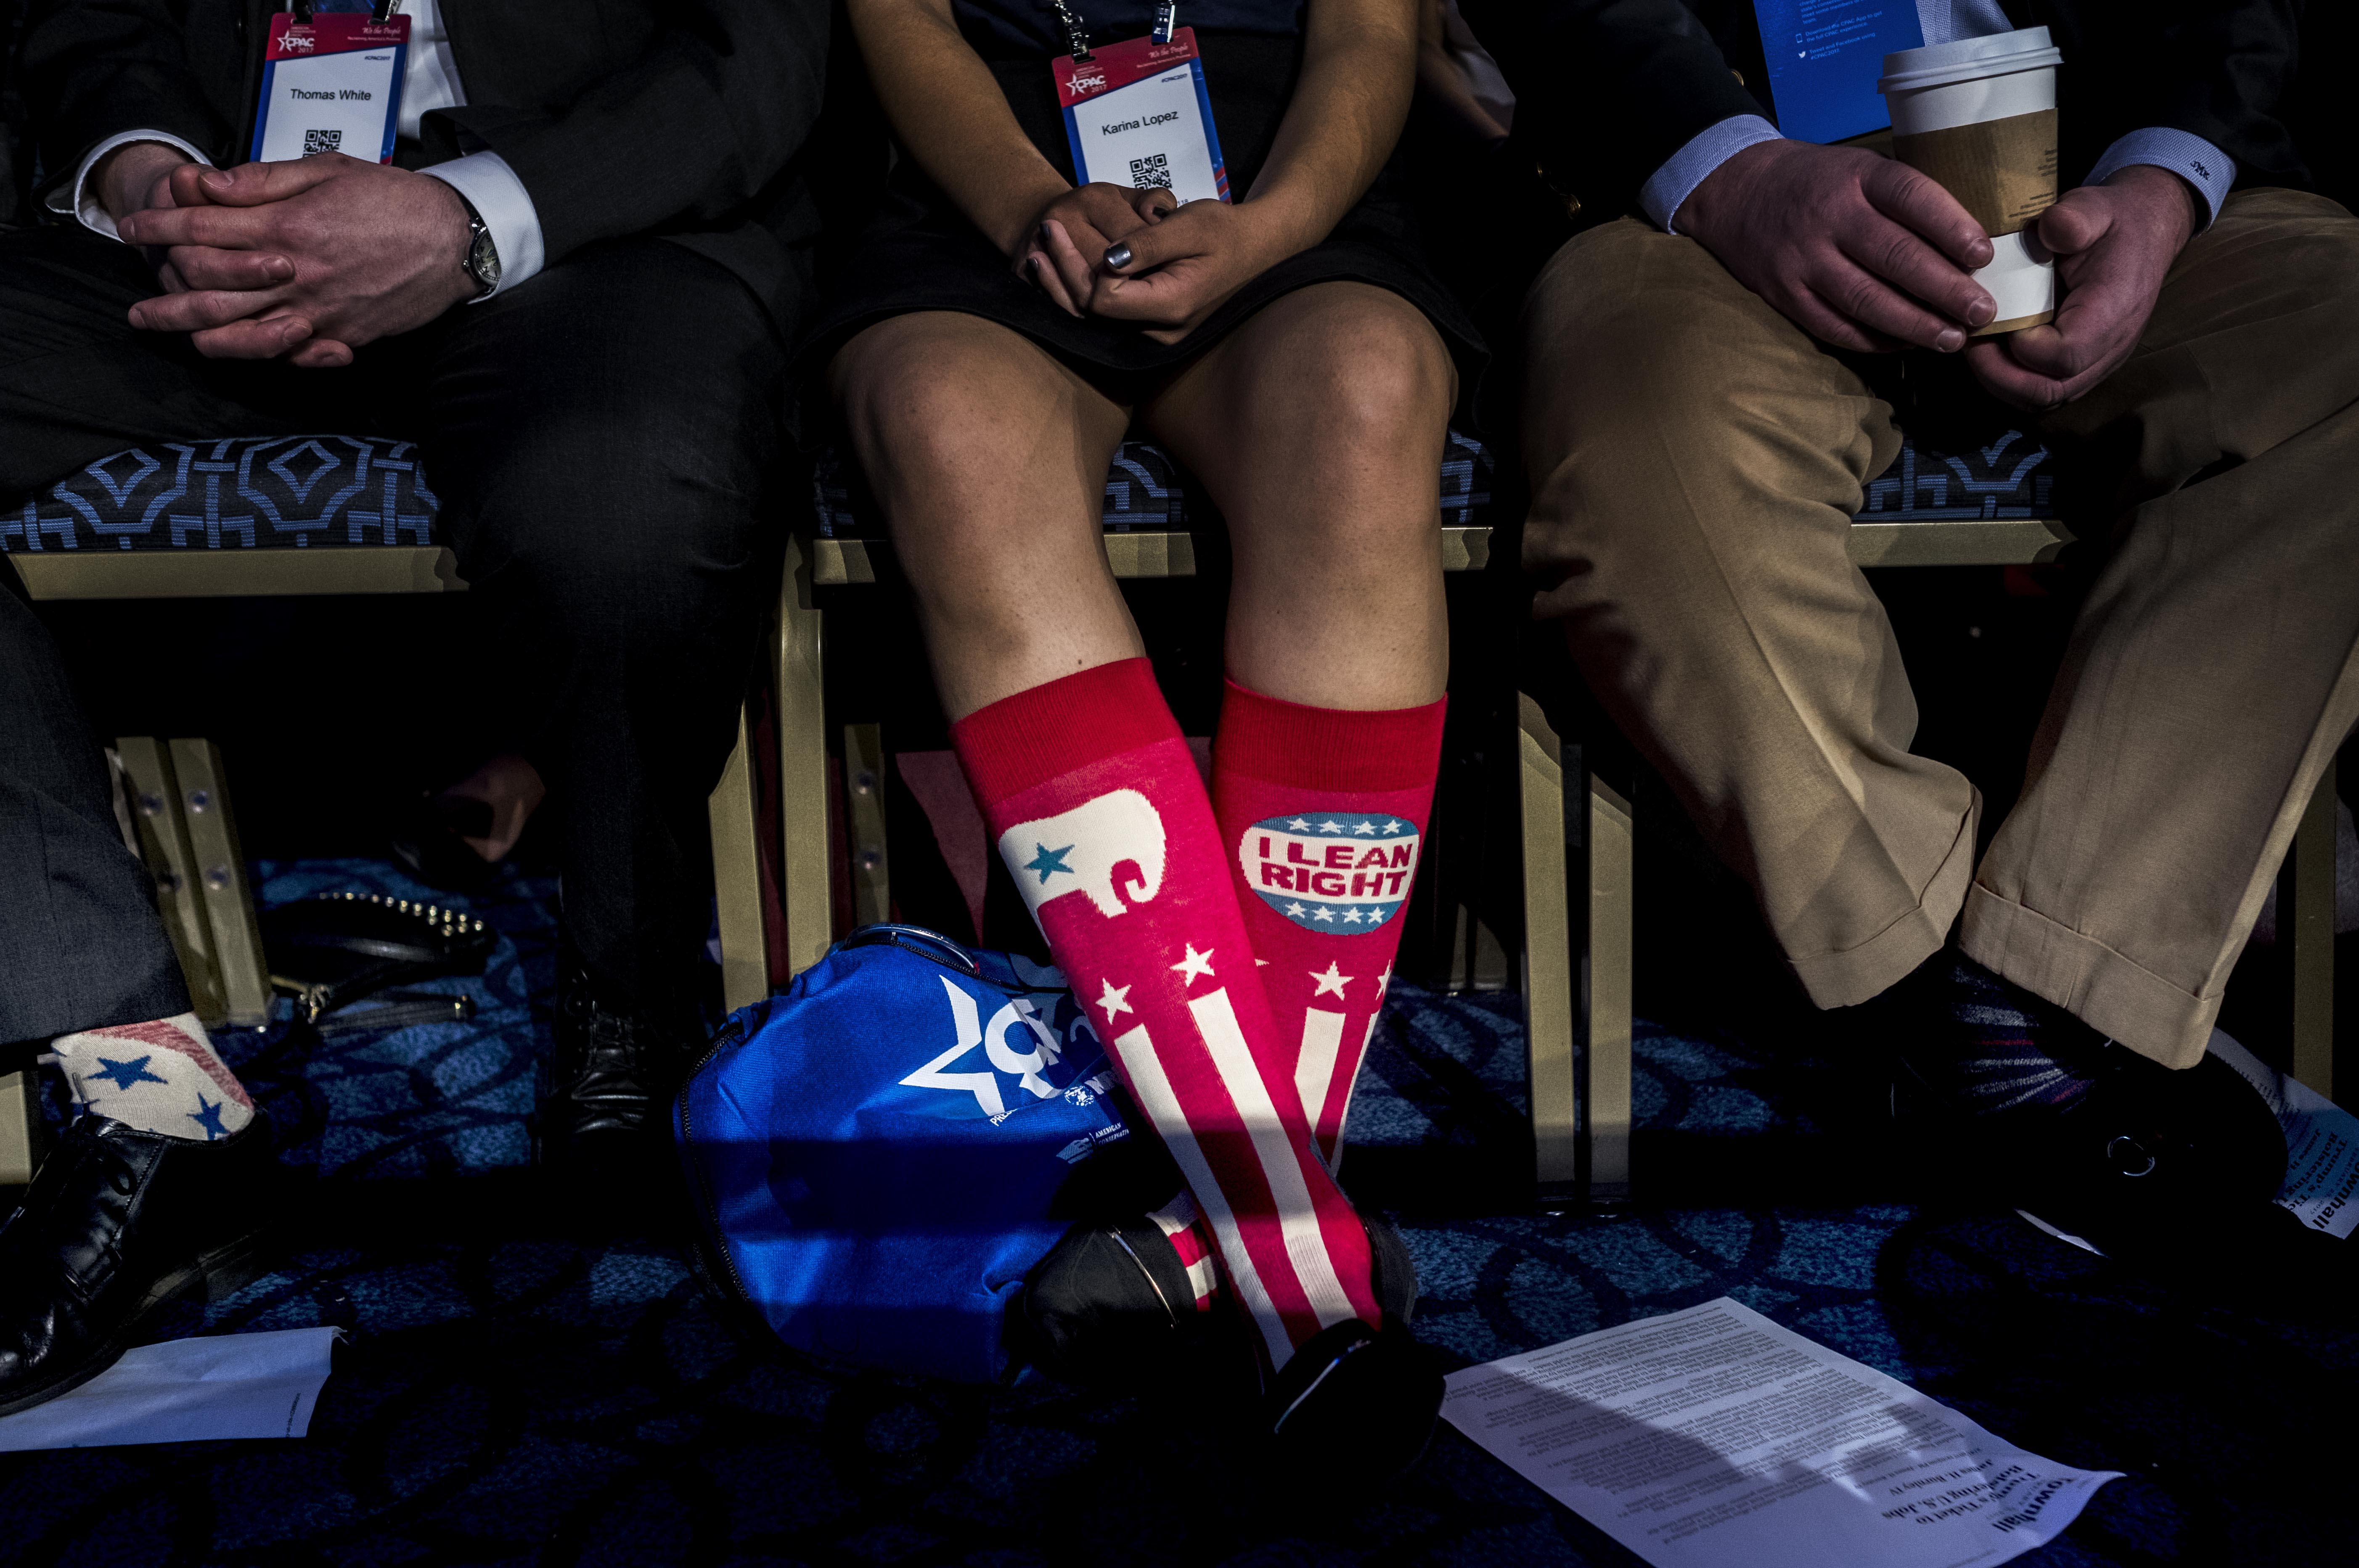 Trump Socks Red White and Blue Republican Socks Conservative Gifts MAGA